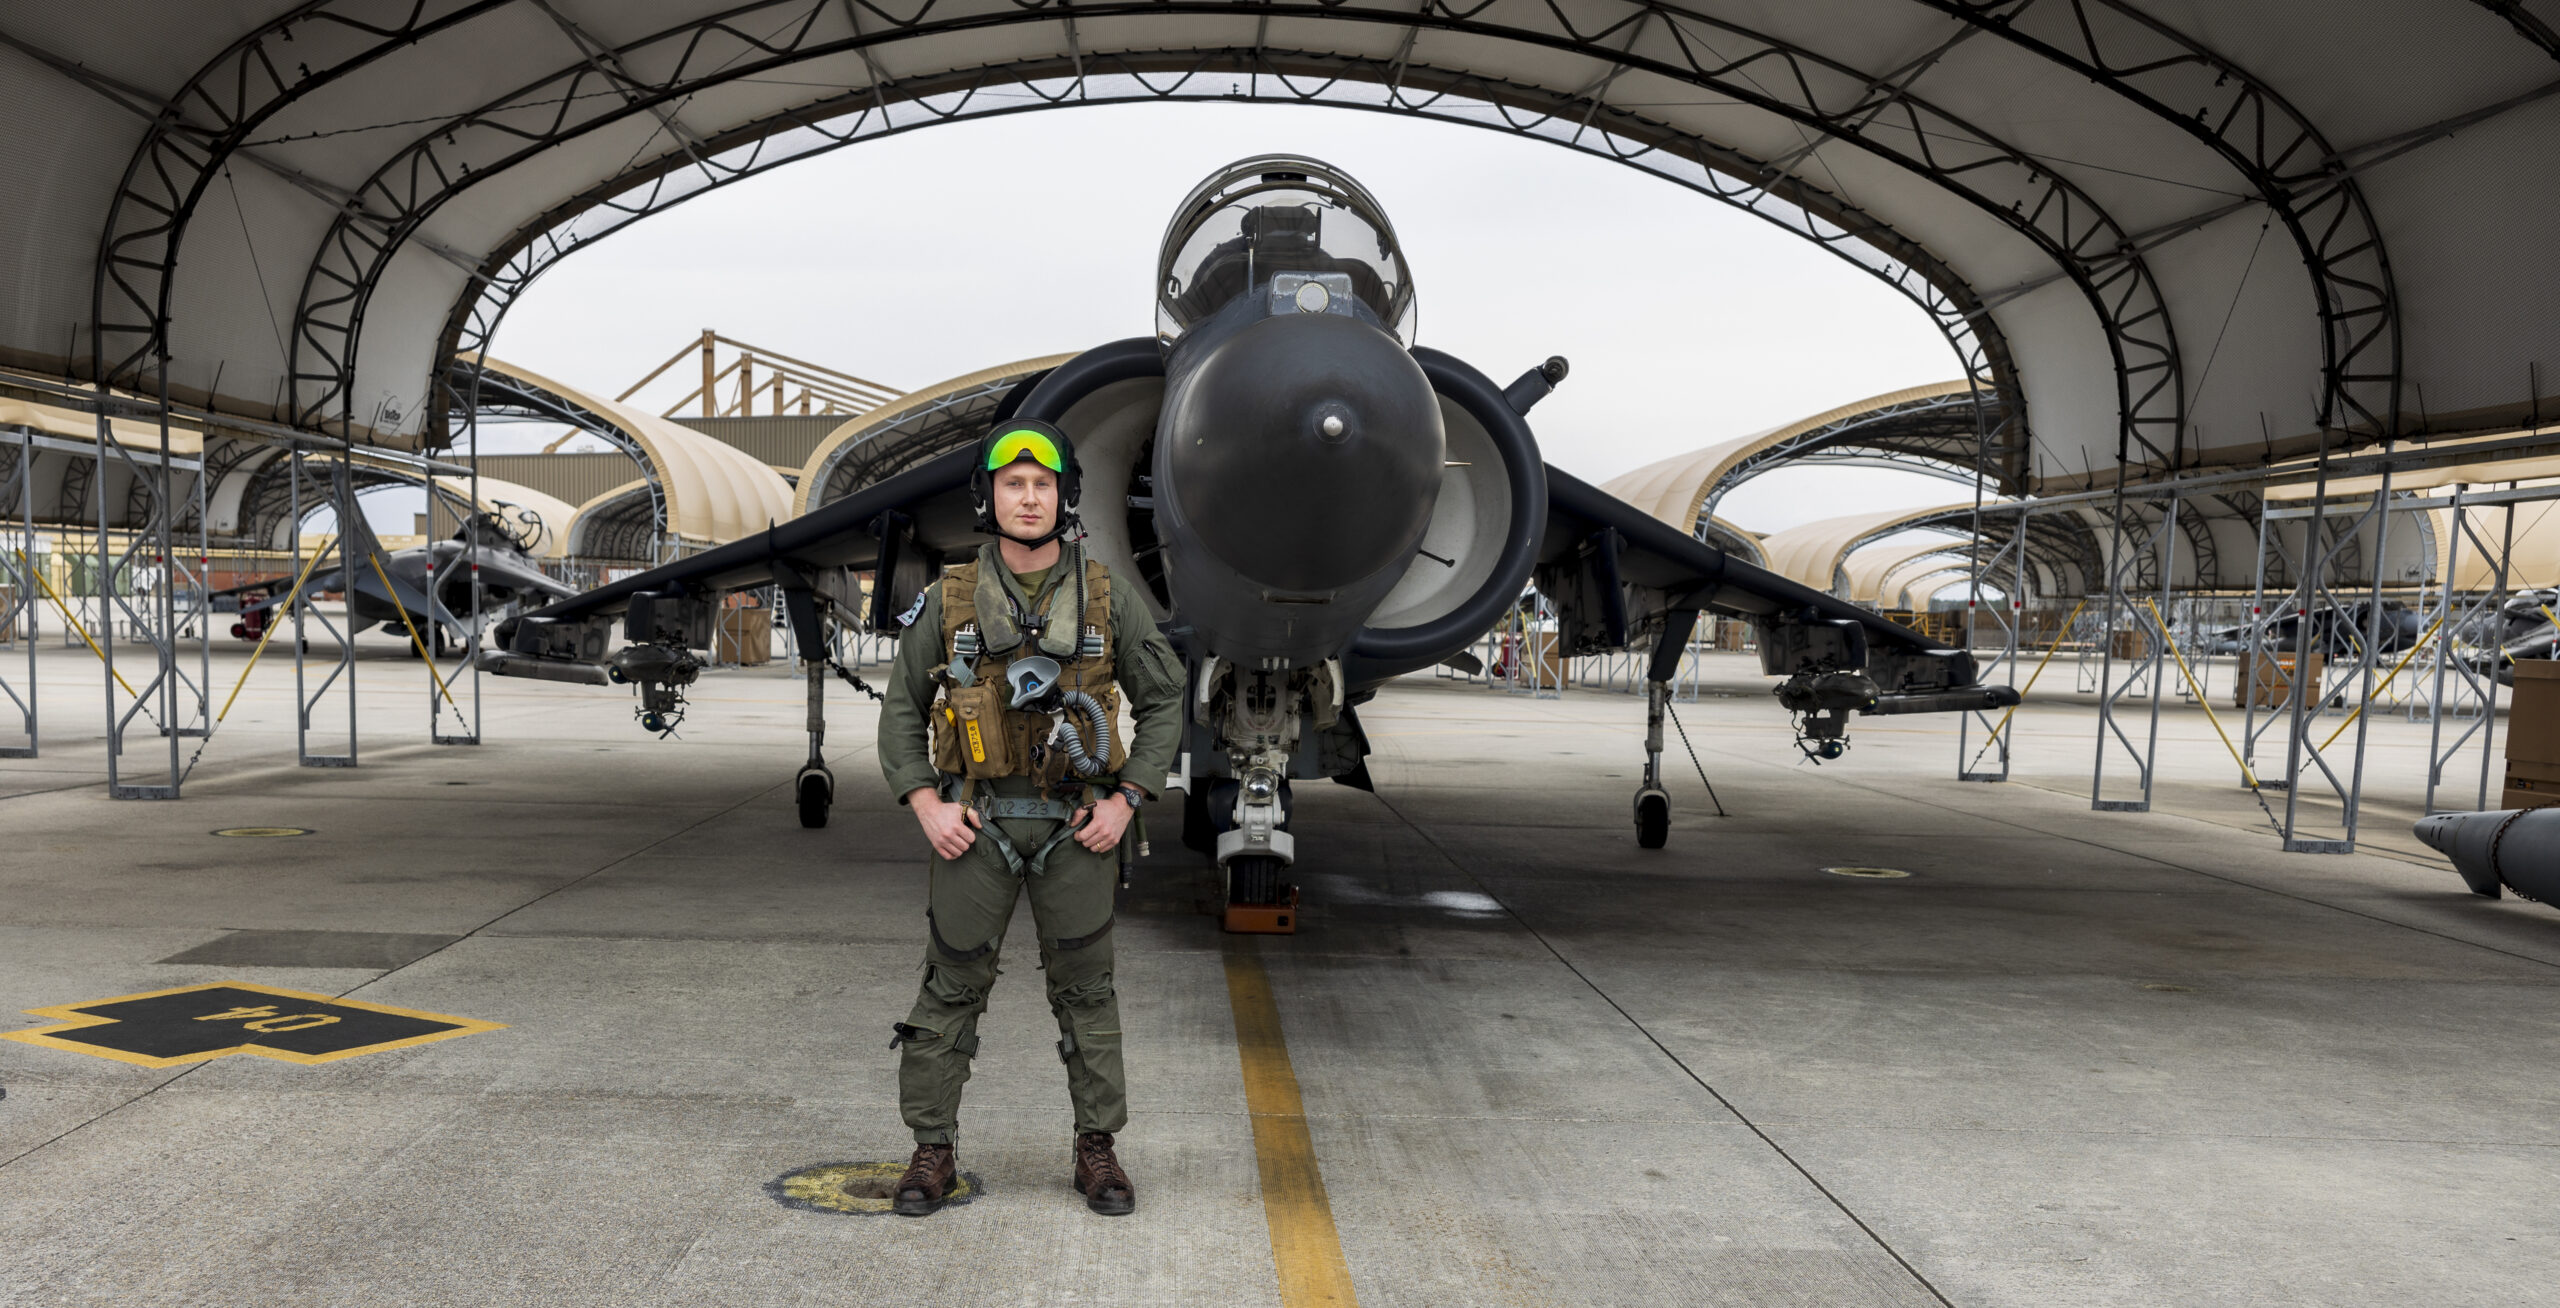 U.S. Marine Corps Capt. Joshua Corbett, a native of New Jersey and a student naval aviator with the AV-8B Fleet Replacement Detachment (FRD), poses for a photo prior to a flight at Marine Corps Air Station Cherry Point, North Carolina, March 27, 2024. <em>U.S. Marine Corps photo by Staff Sgt. Daisha Ramirez</em>